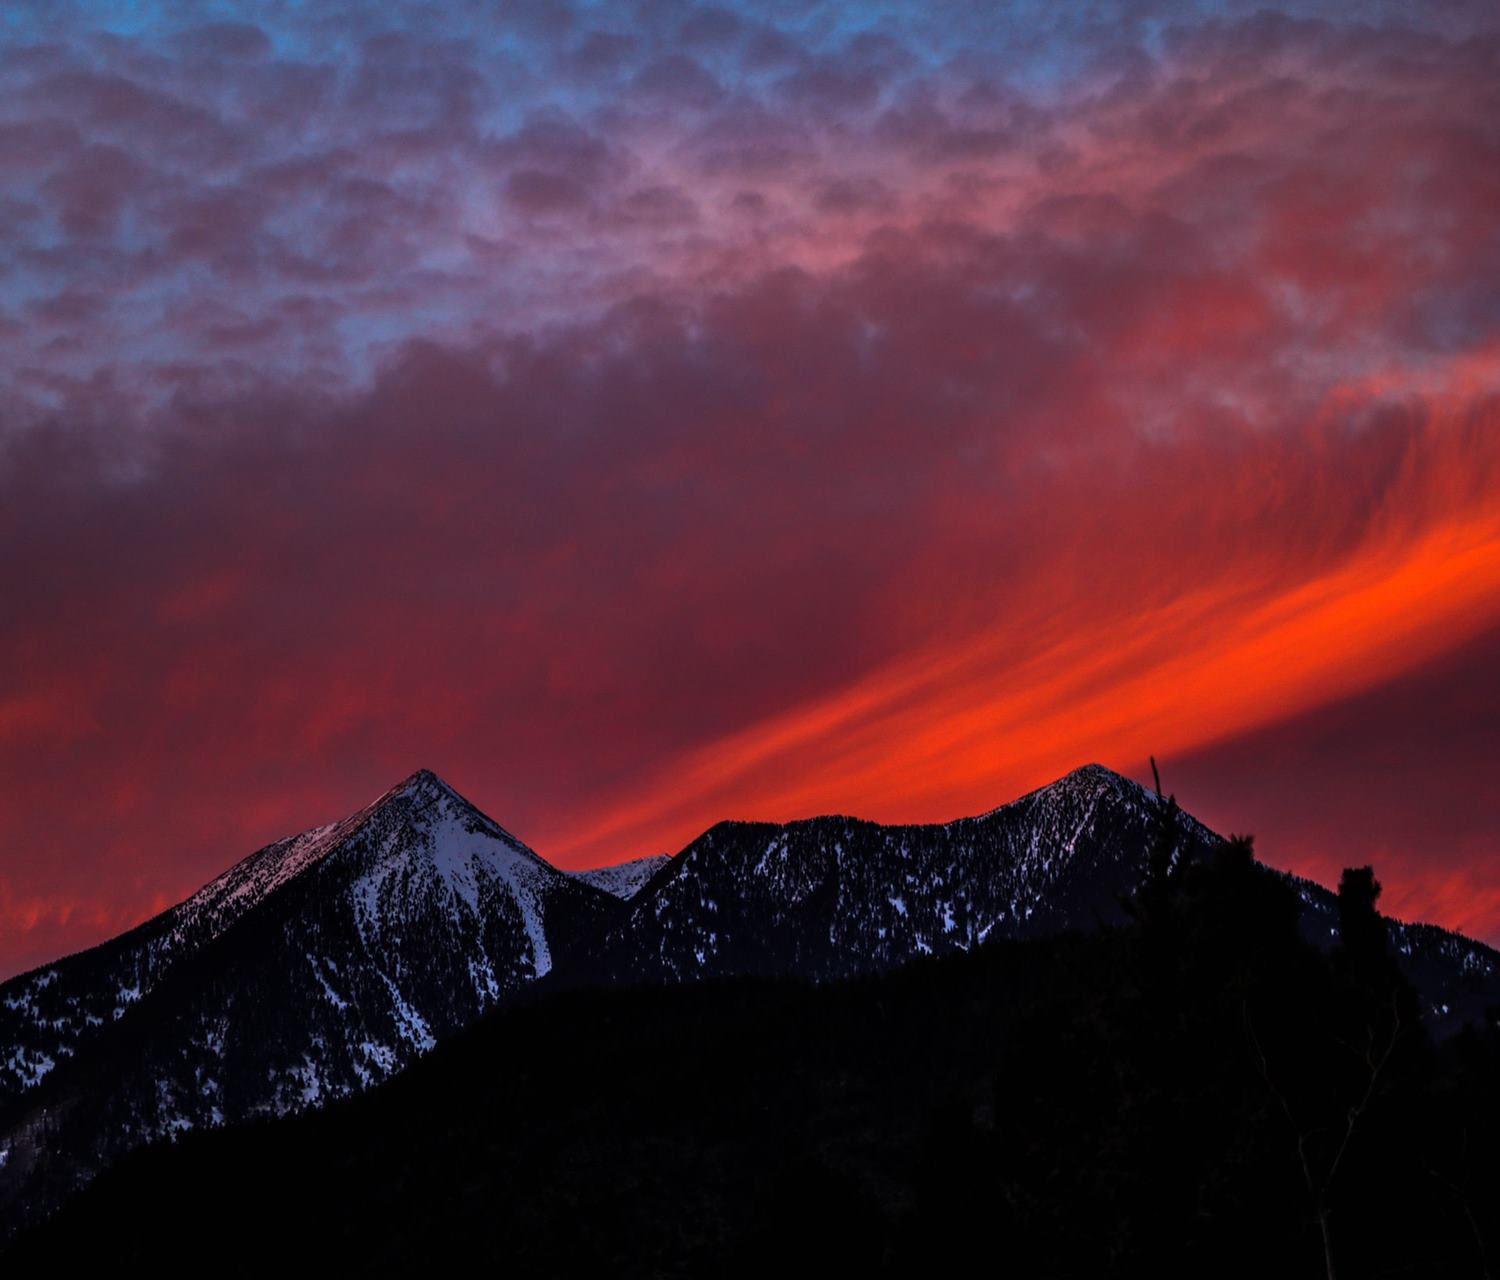 Sunset over snowcapped mountaing in Flagstaff, Arizona